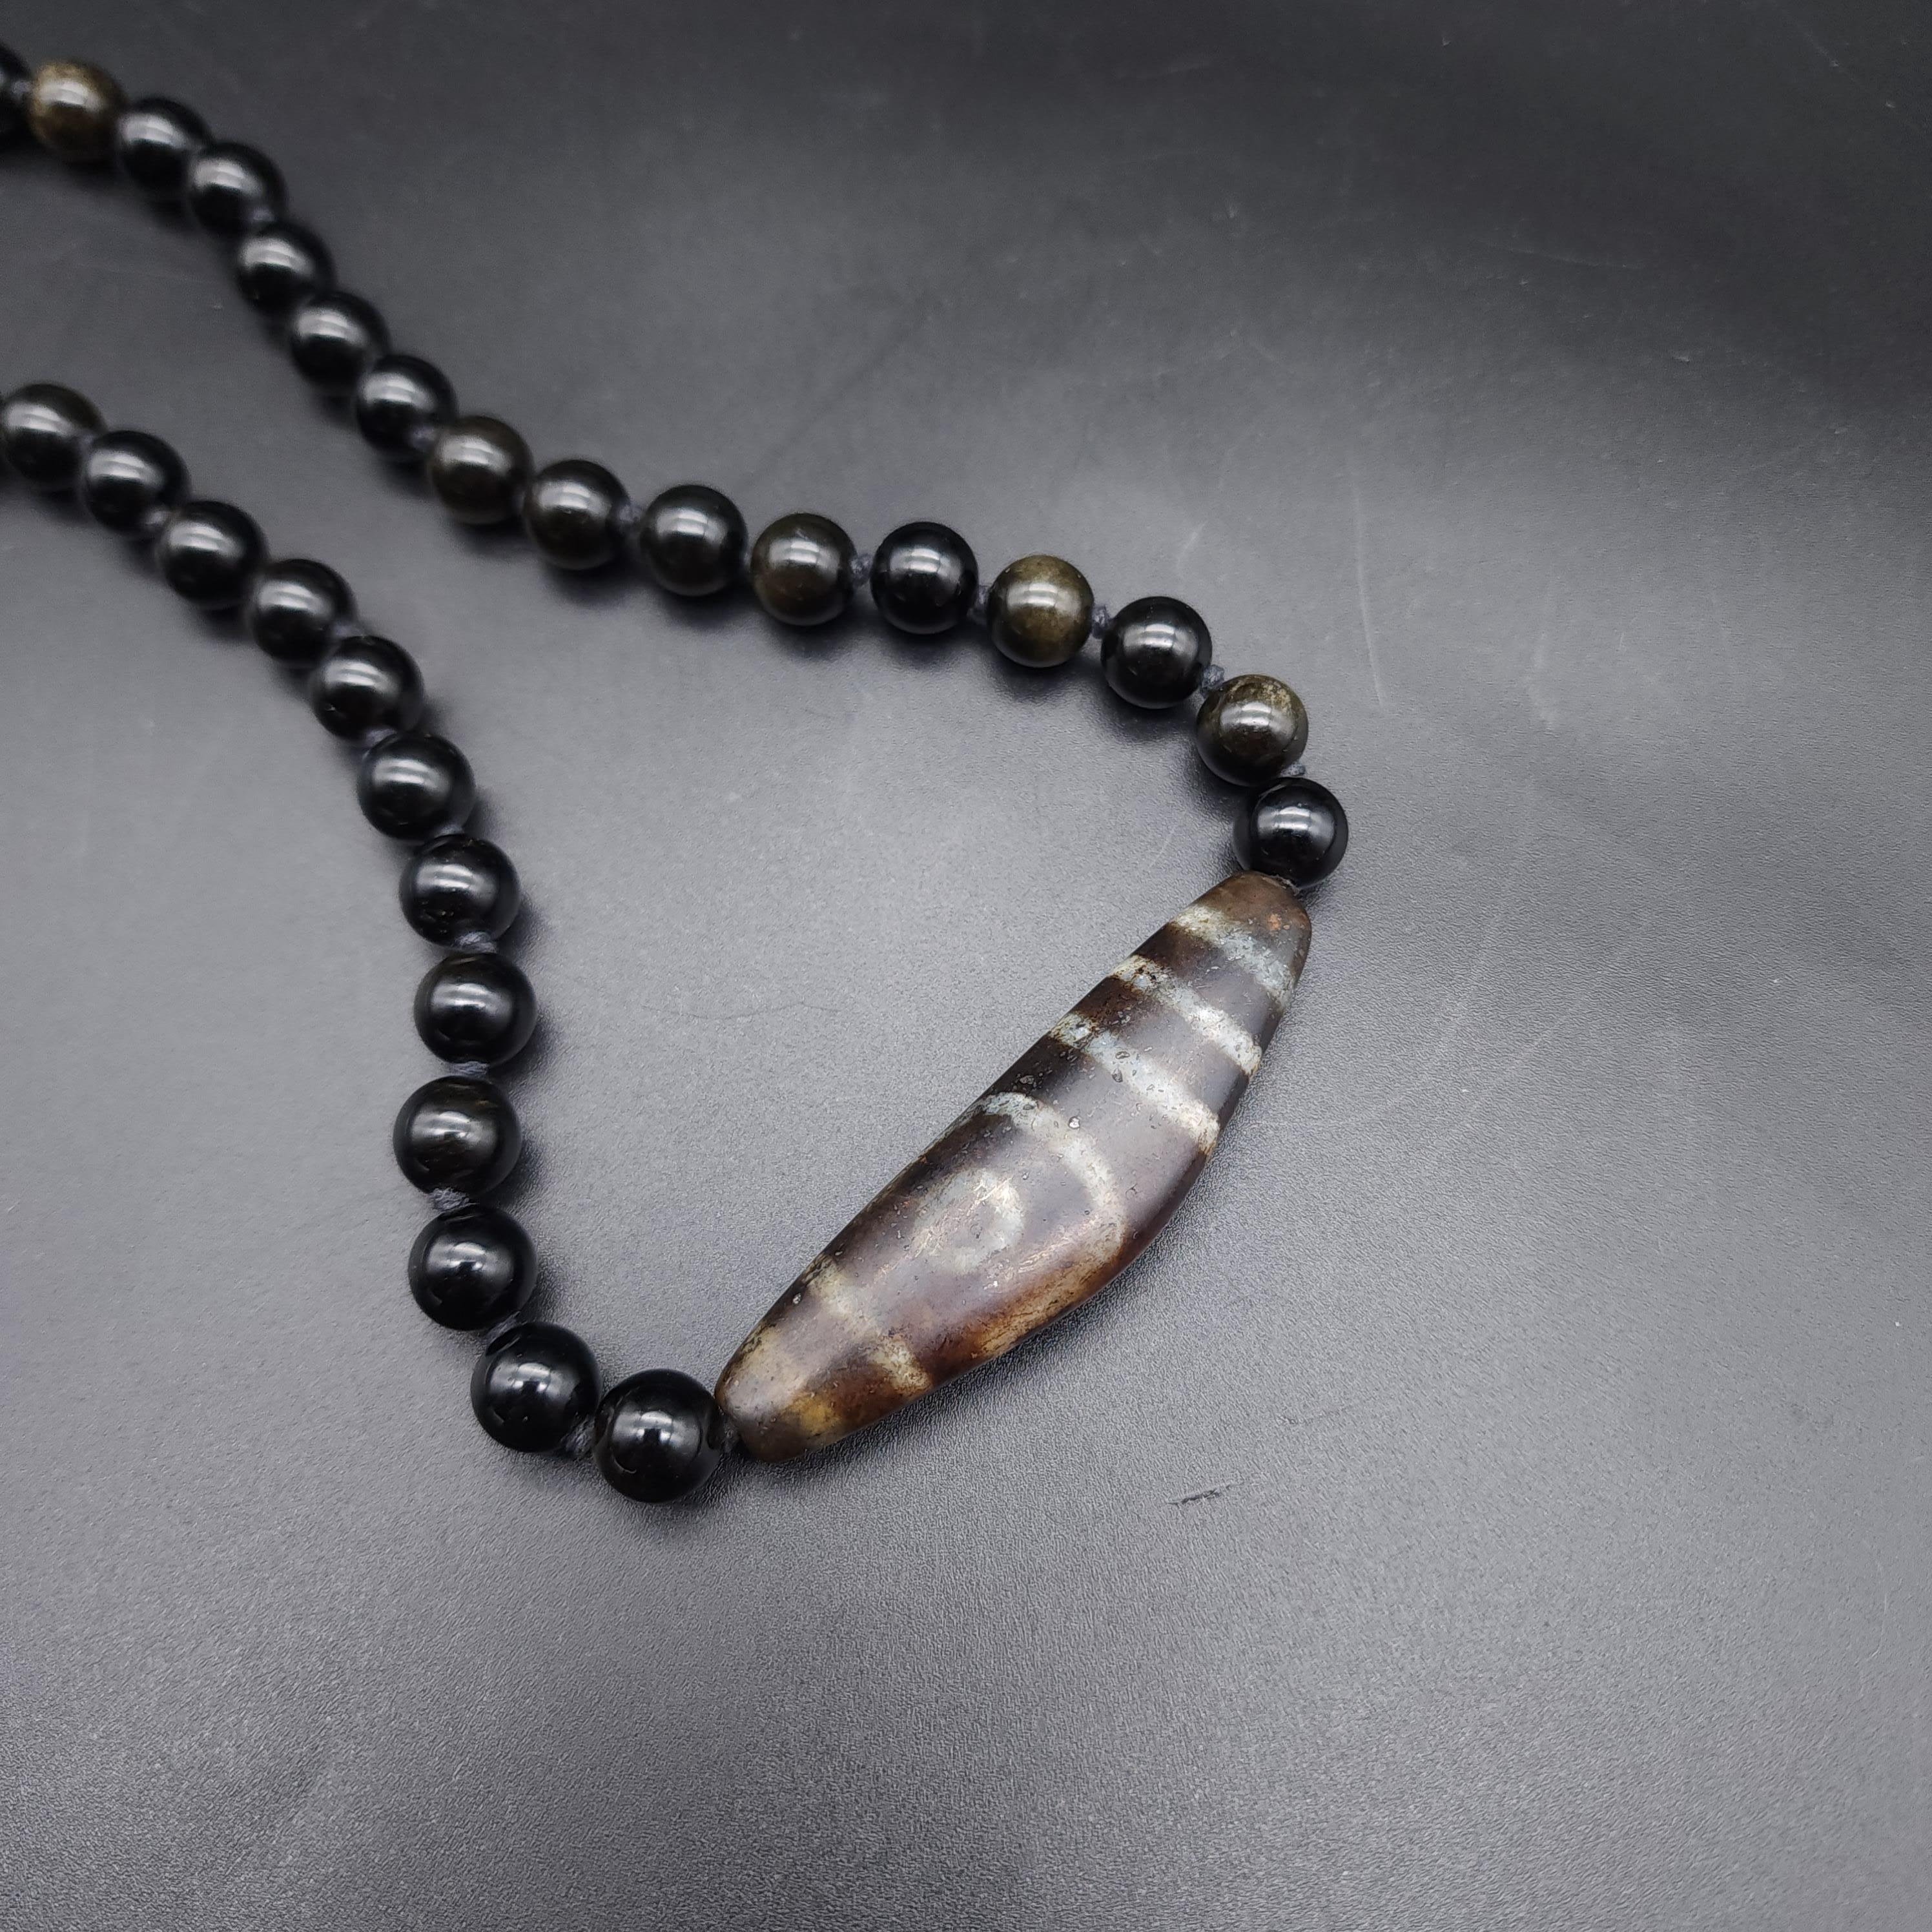 Necklace length: 48 cm / 18.5 in
Beads approx 1cm each, polished obsidian glass
Dzi pendant: 6.5 cm / 2.5 in wide
Marks / Hallmarks: 925 on clasp

Elevate your style with our stunning dzi centerpiece necklace, featuring mesmerizing obsidian beads